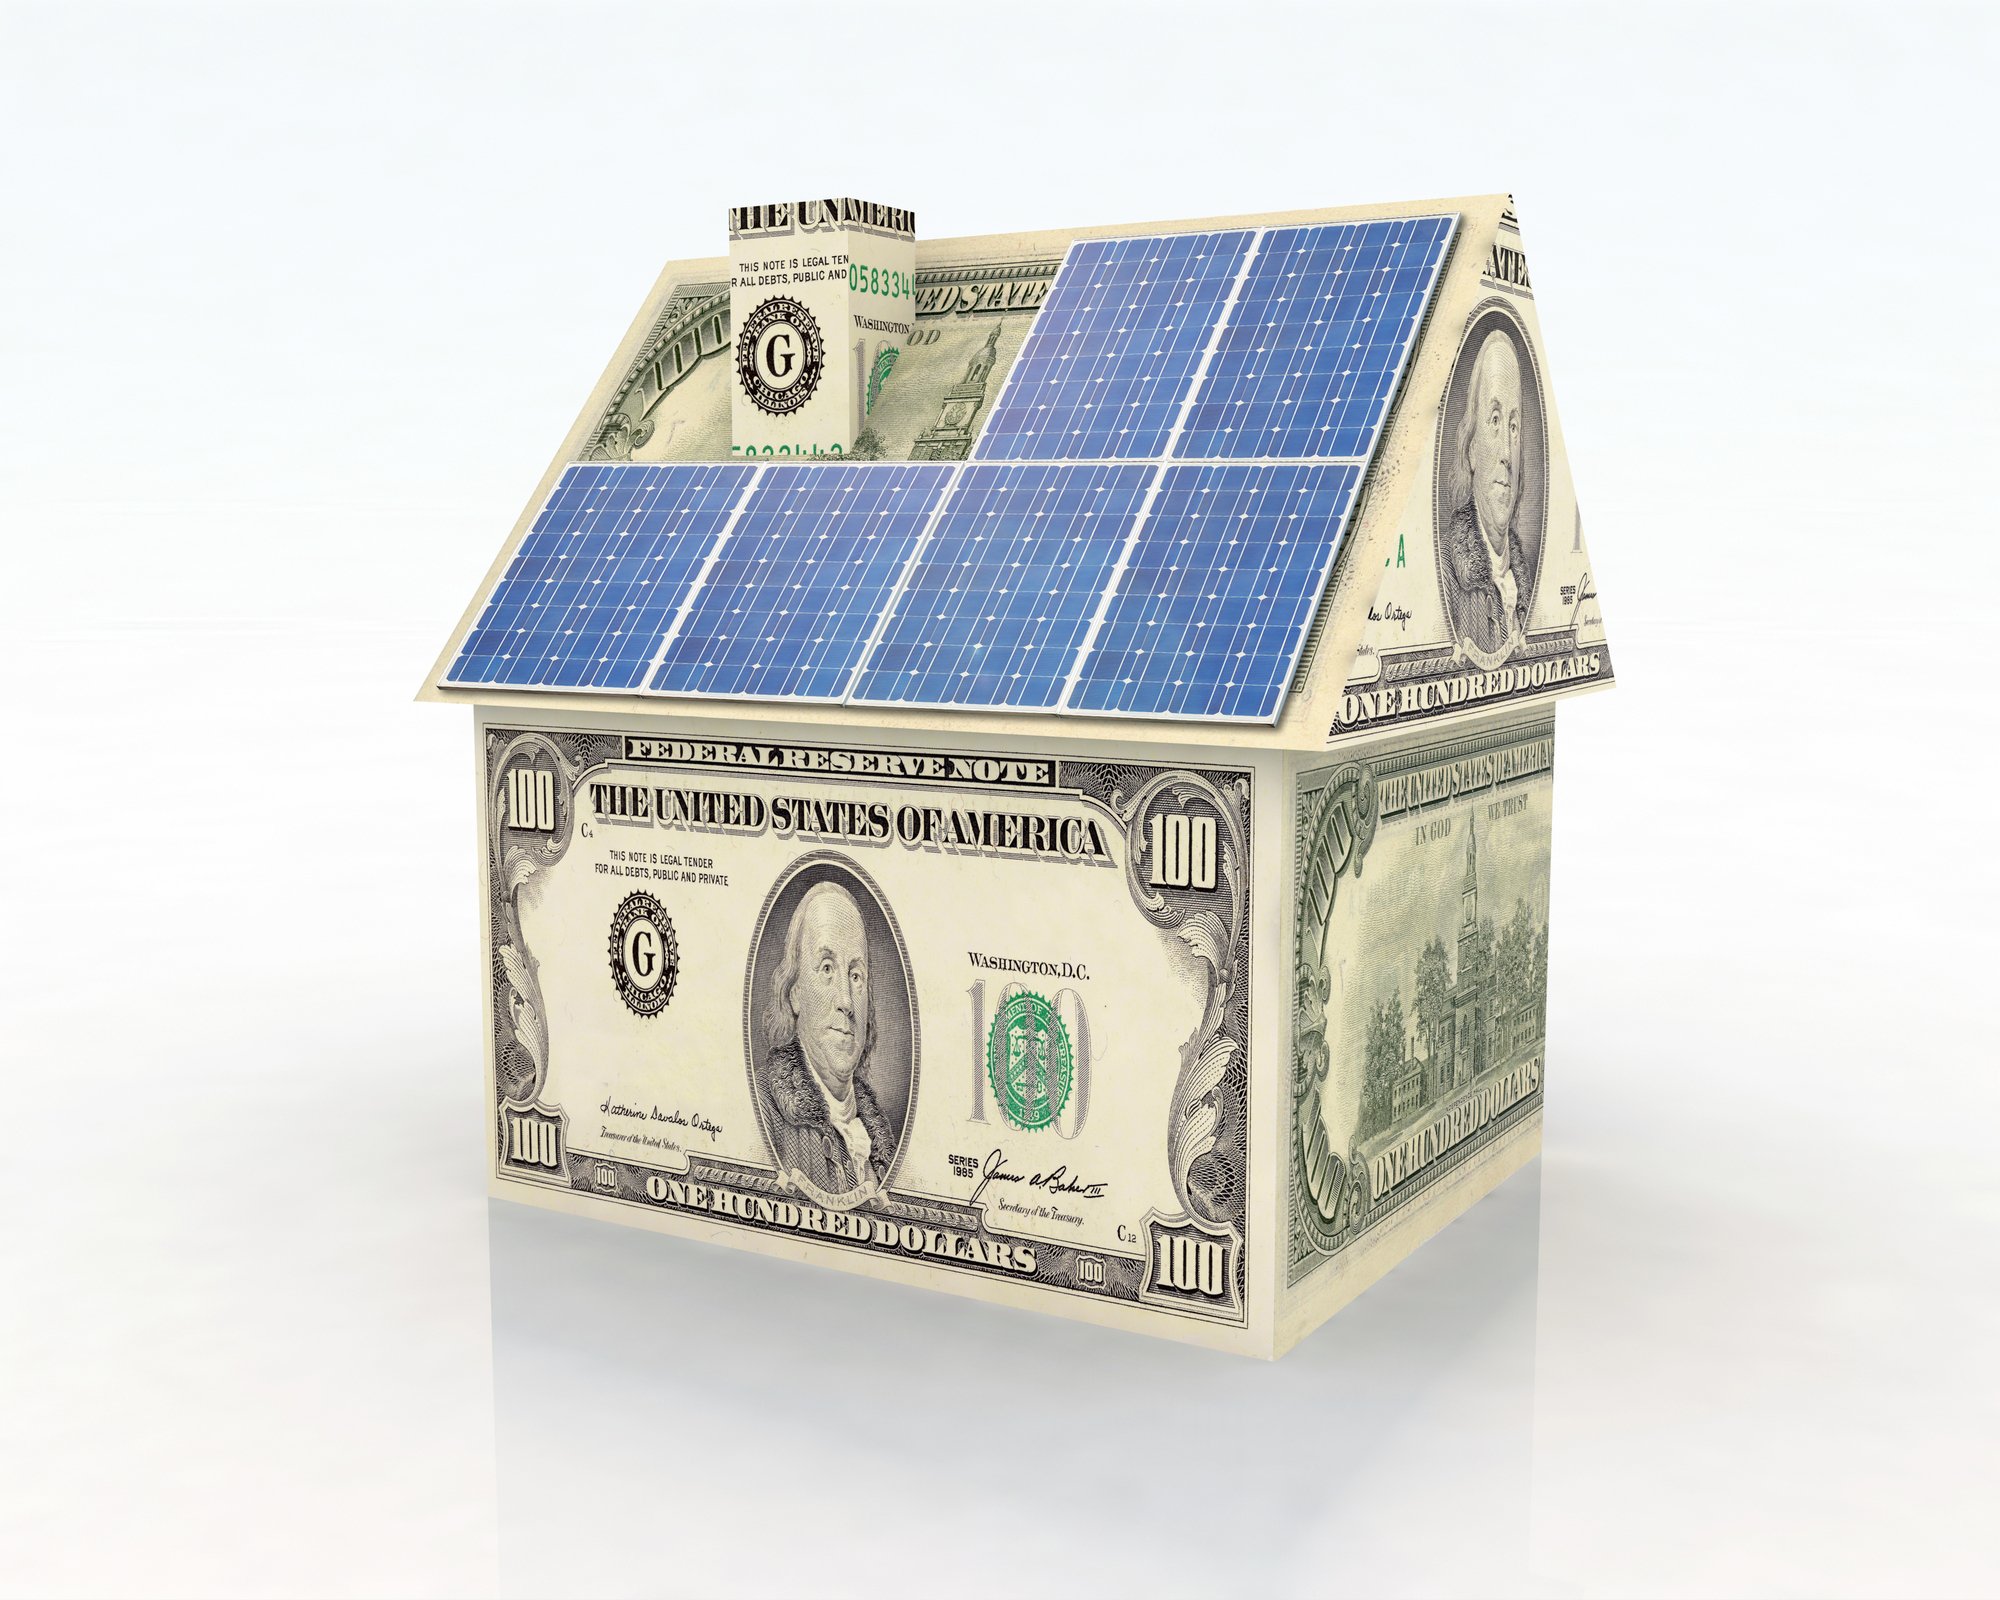 Financing for photovoltaic system